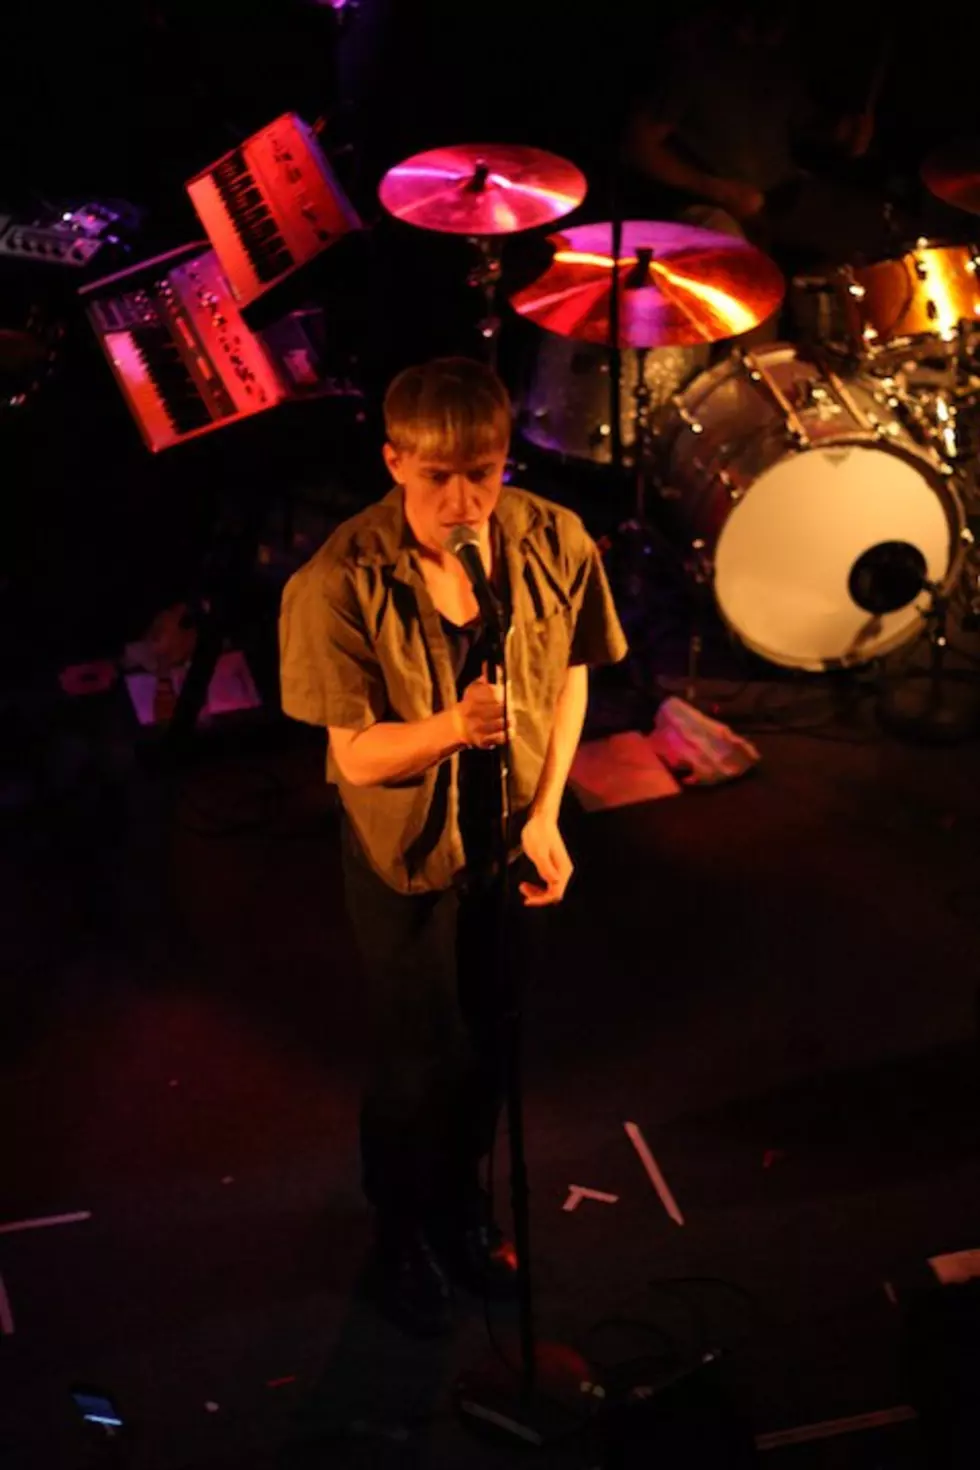 The Drums, Veronica Falls played Subterranean (pics, setlist)